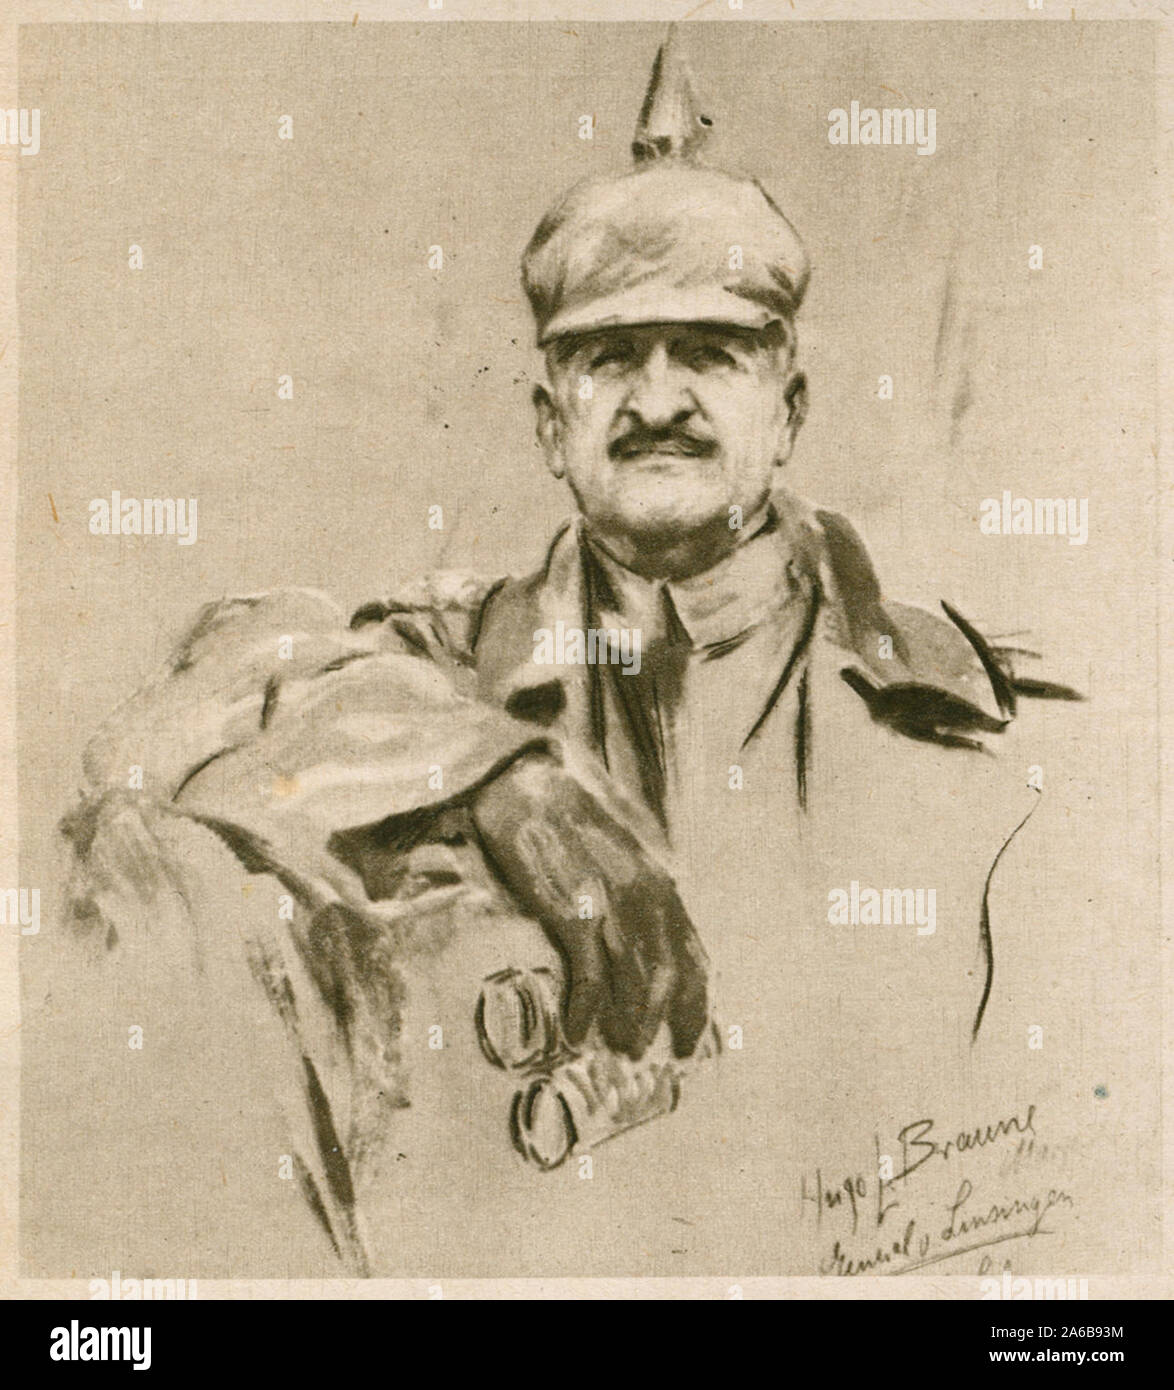 Pencil sketch dated 1916 showing General Alexander Adolf August Karl von Linsingen of the German army who commanded on the Eastern front with Russia.  Born 10 February 1850 died 5 June 1935 Stock Photo